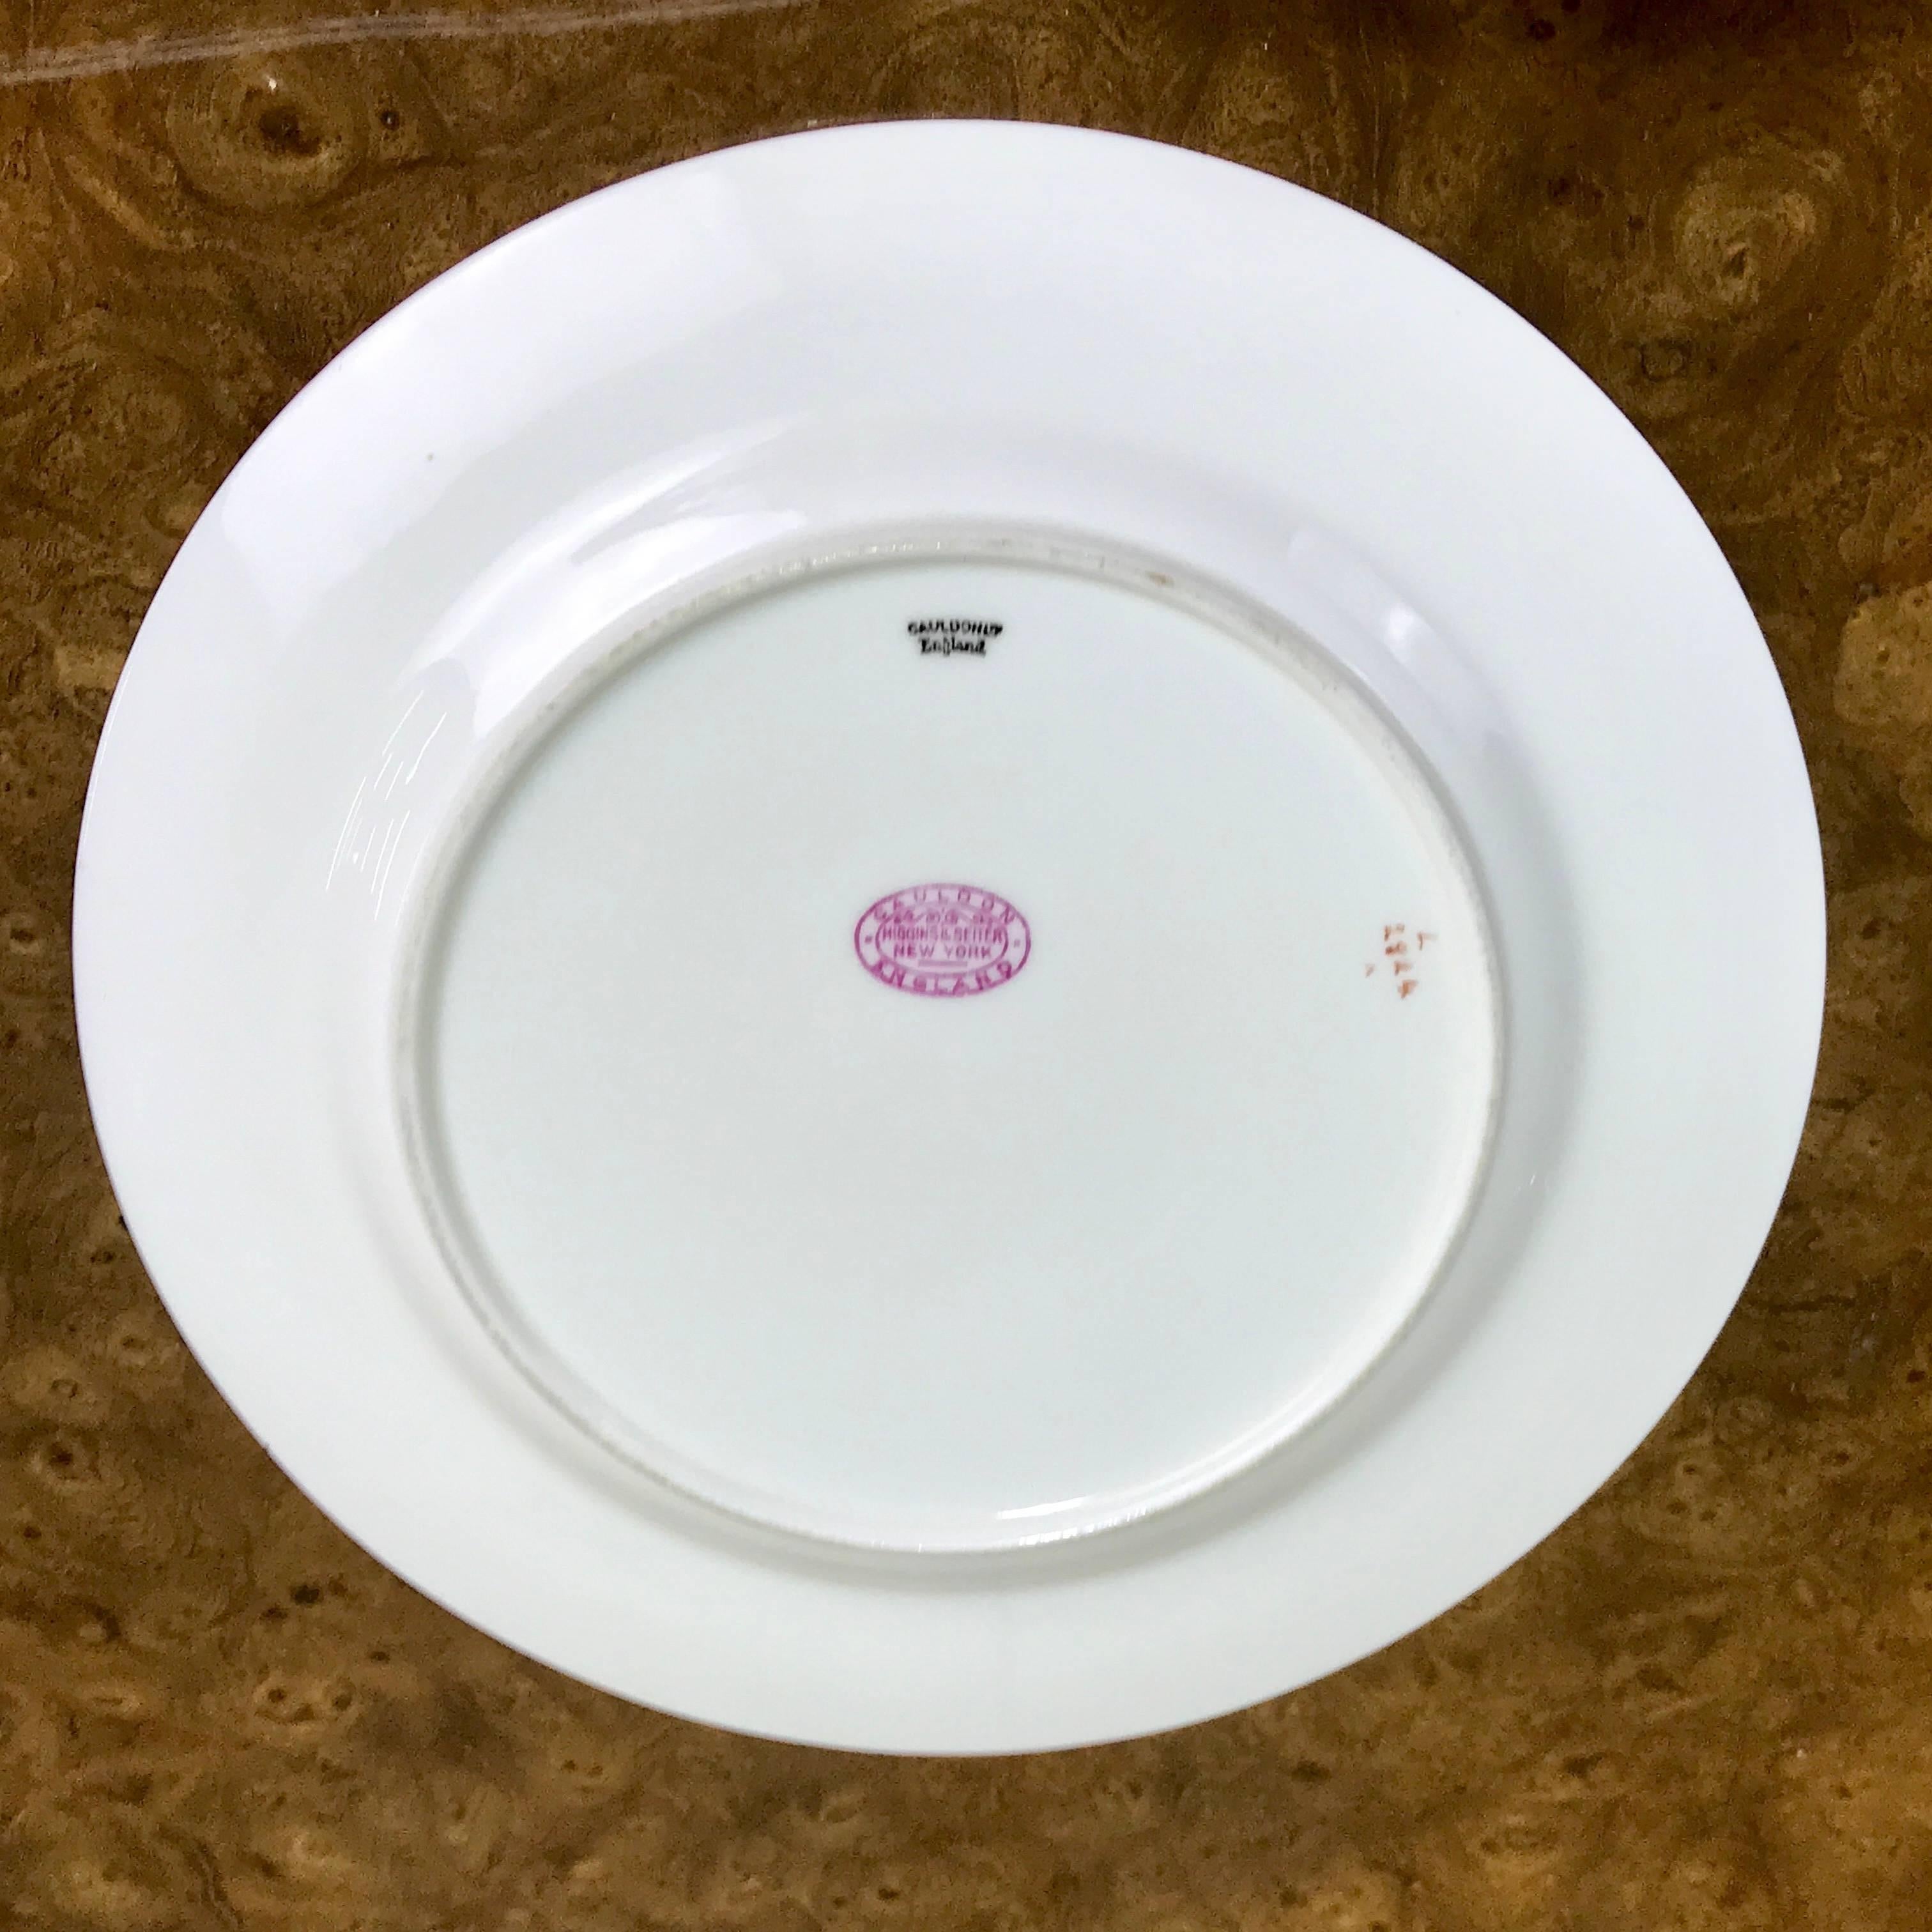 12 First Class Steamship or Yacht Dessert Plates by Cauldon In Good Condition For Sale In Atlanta, GA